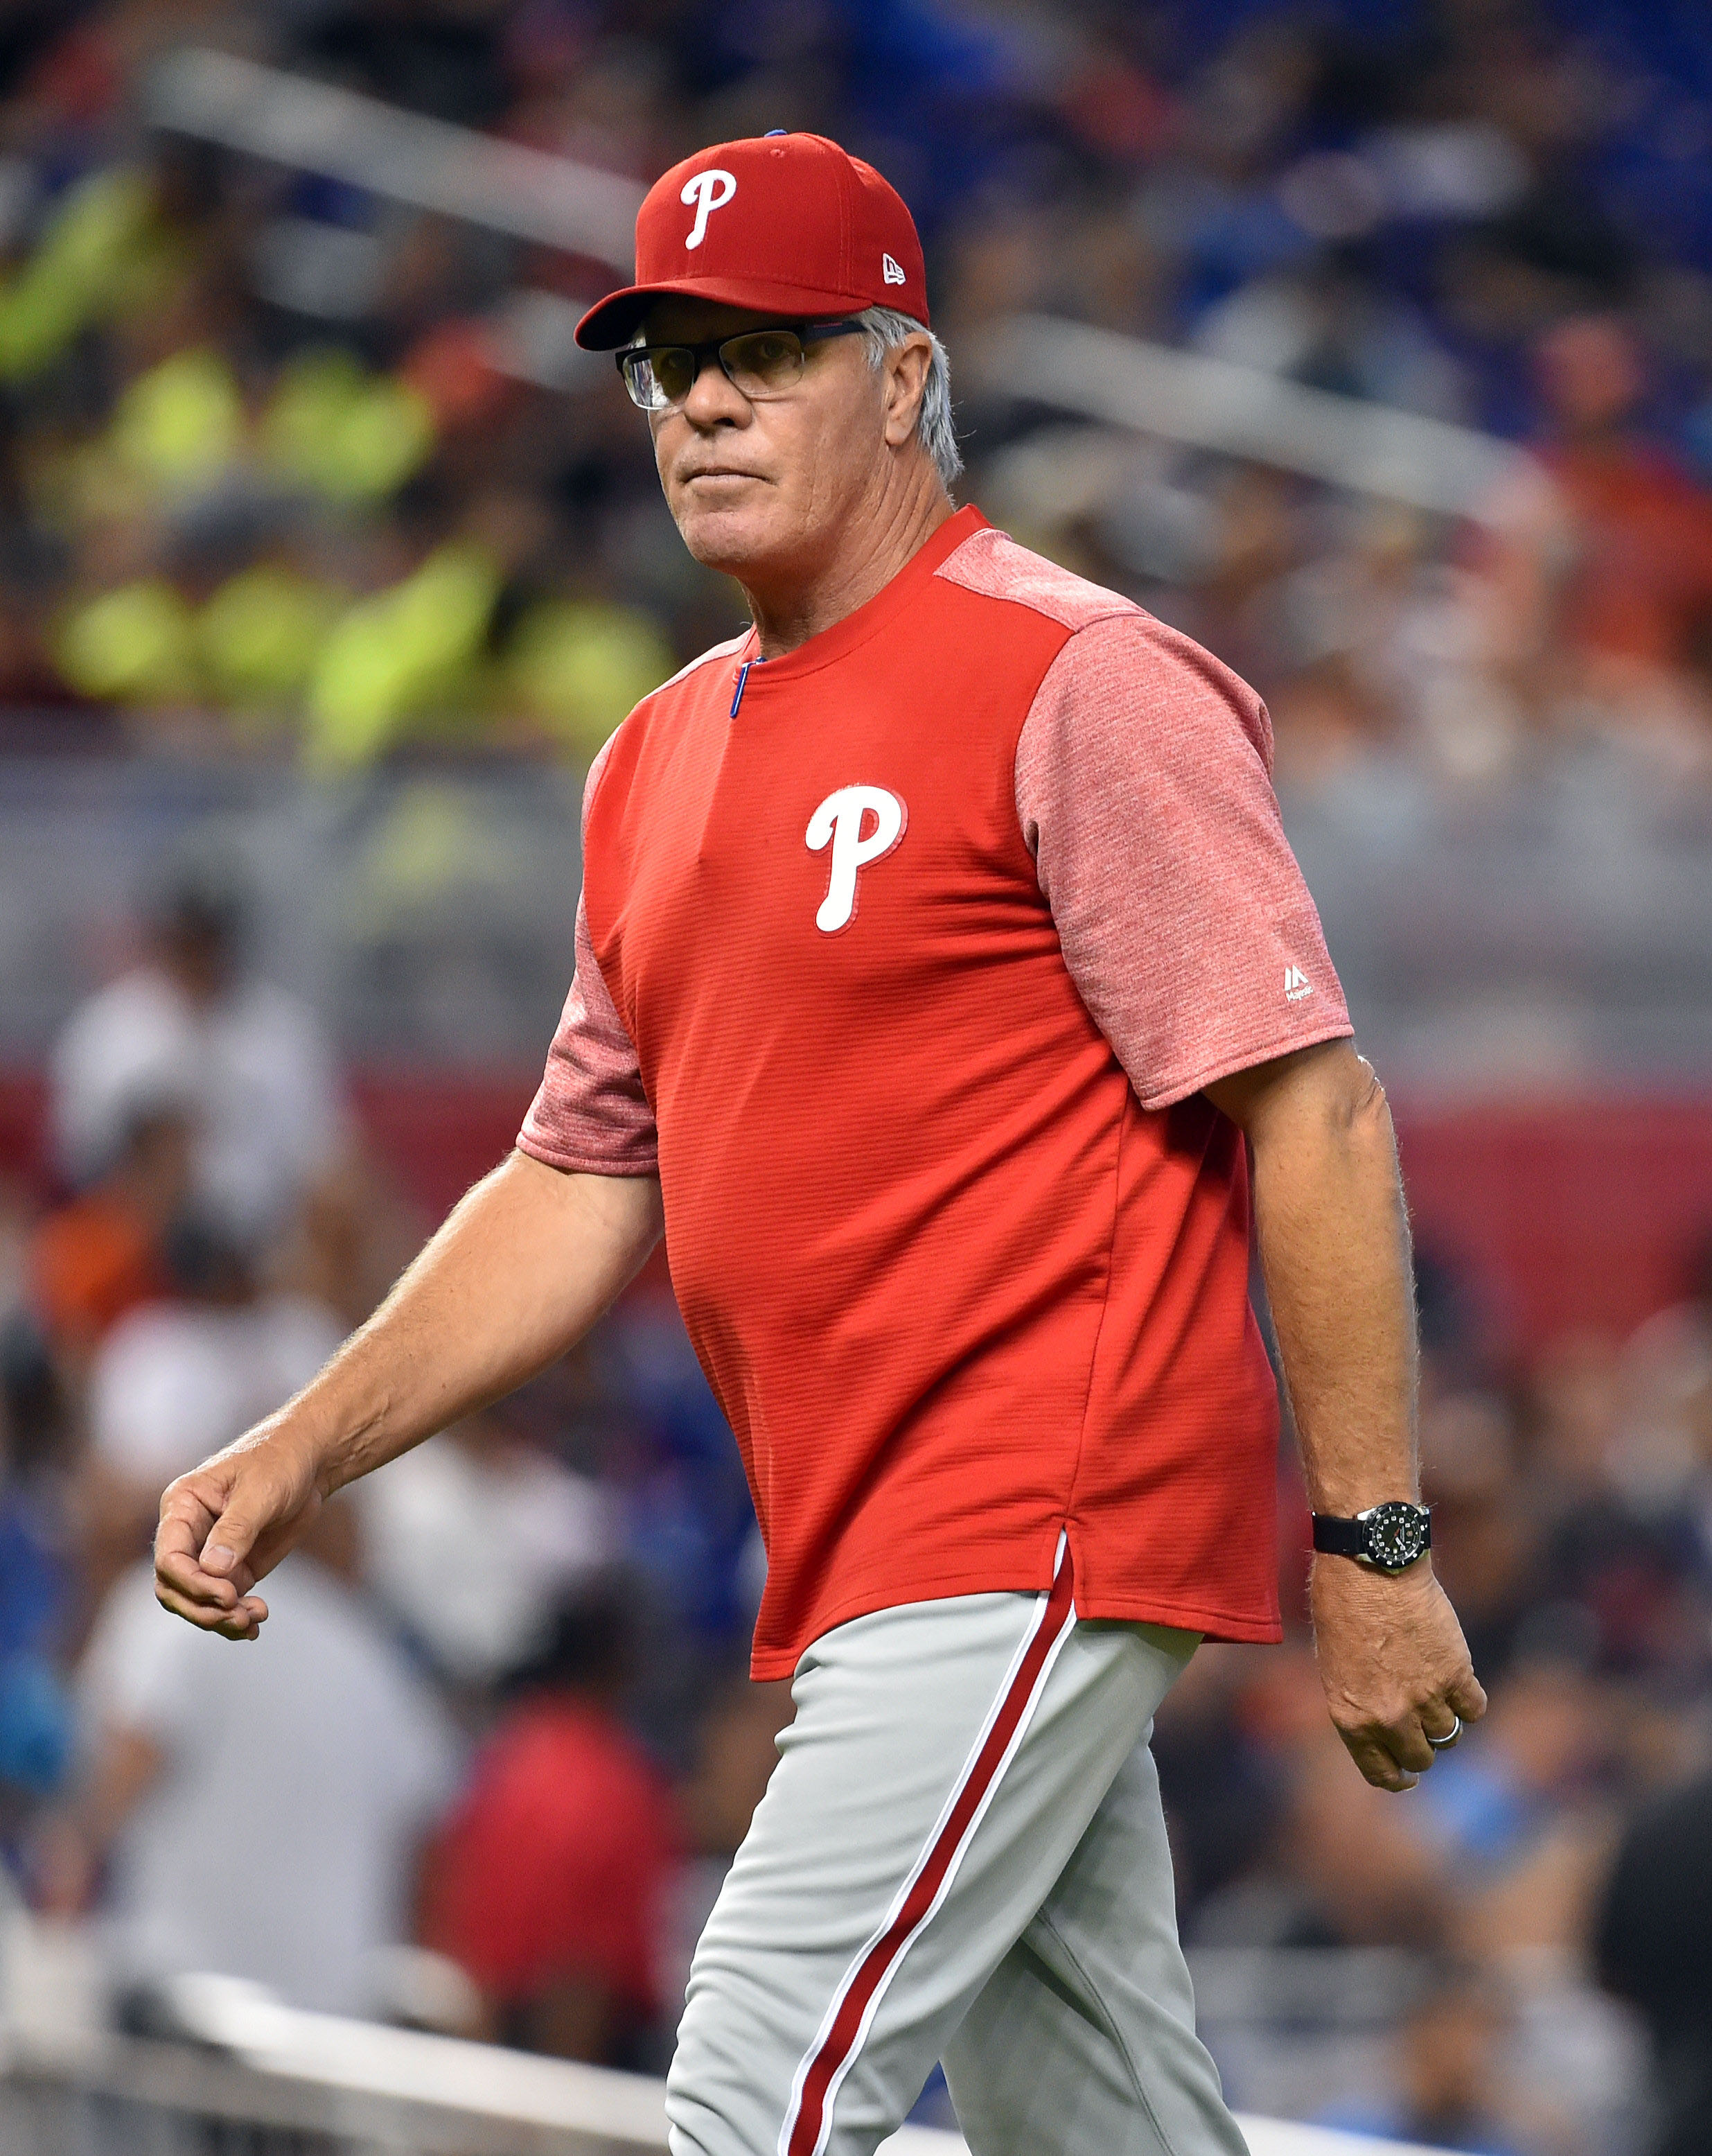 With Mackanin out as Phillies manager, Bowa hoping he can stay at 'home' –  thereporteronline